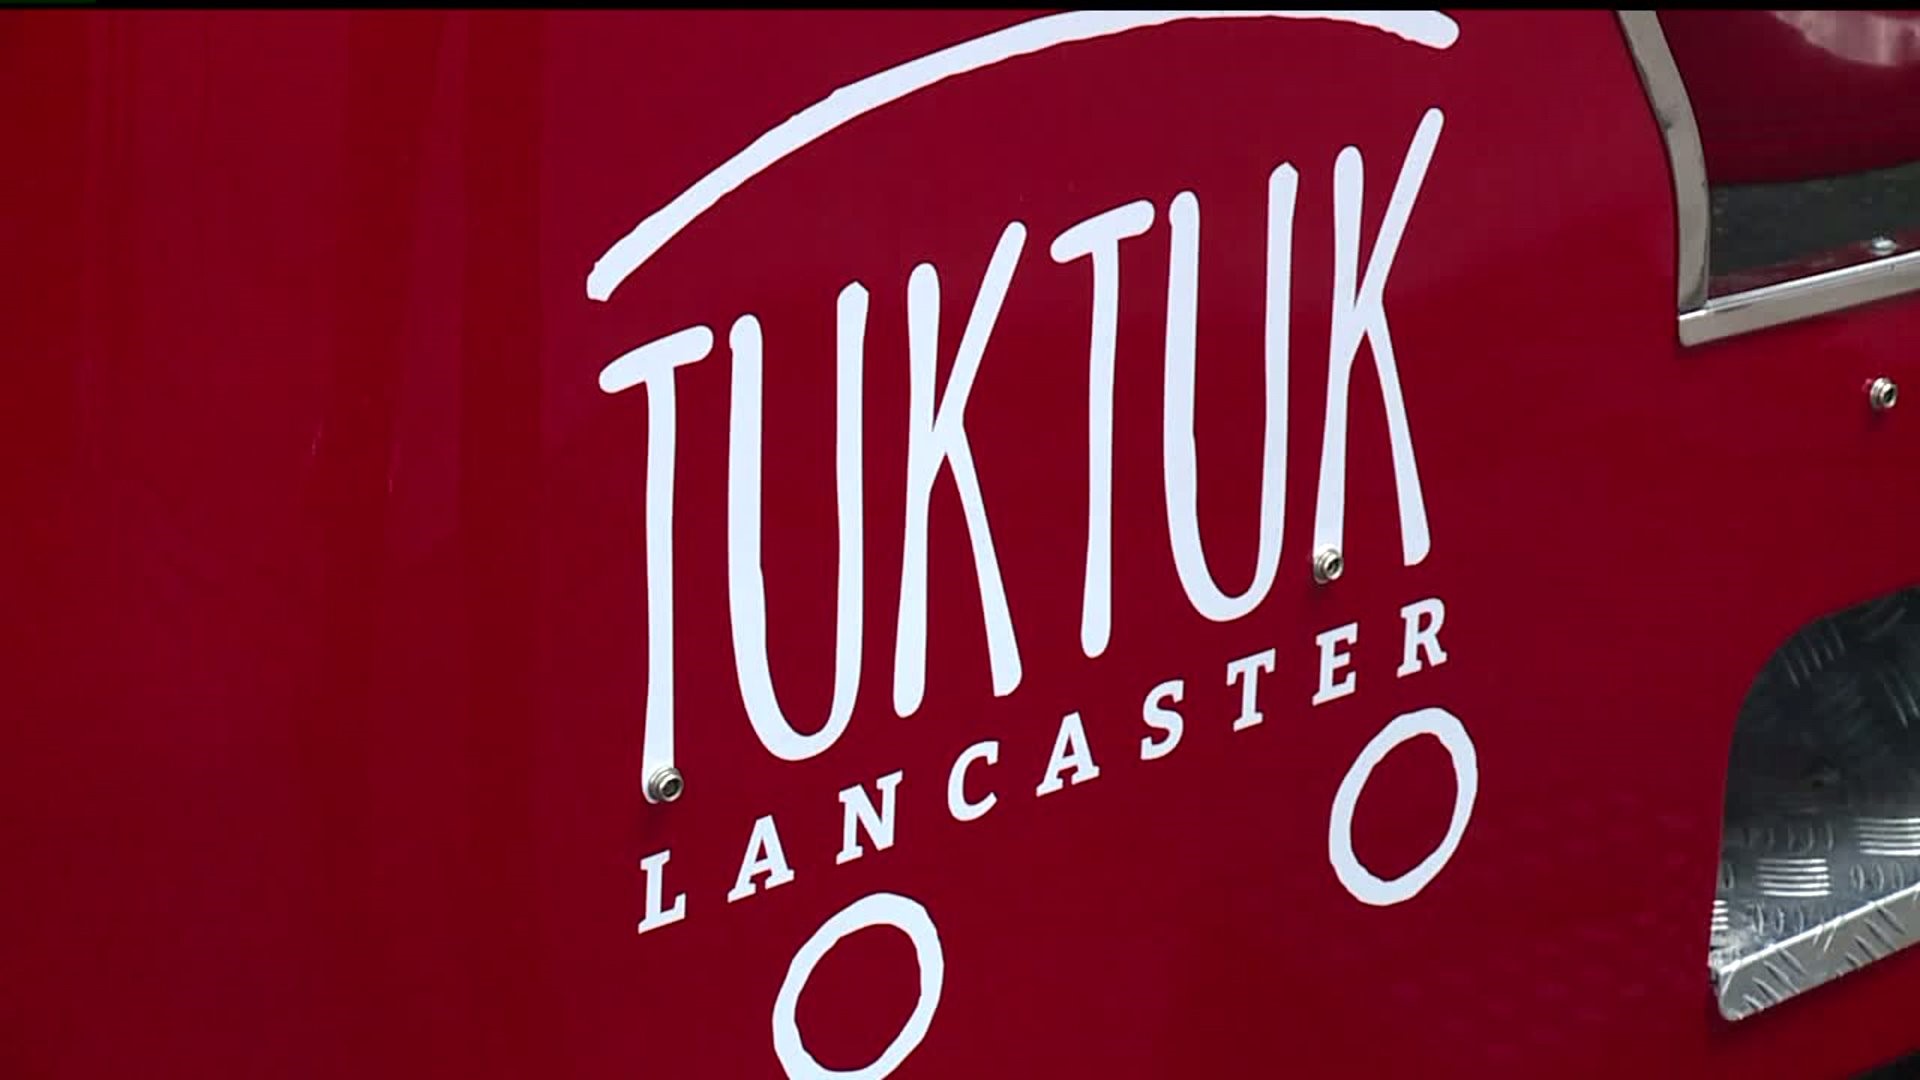 Tuktuk Lancaster creates crowdfunding campaign to help save business